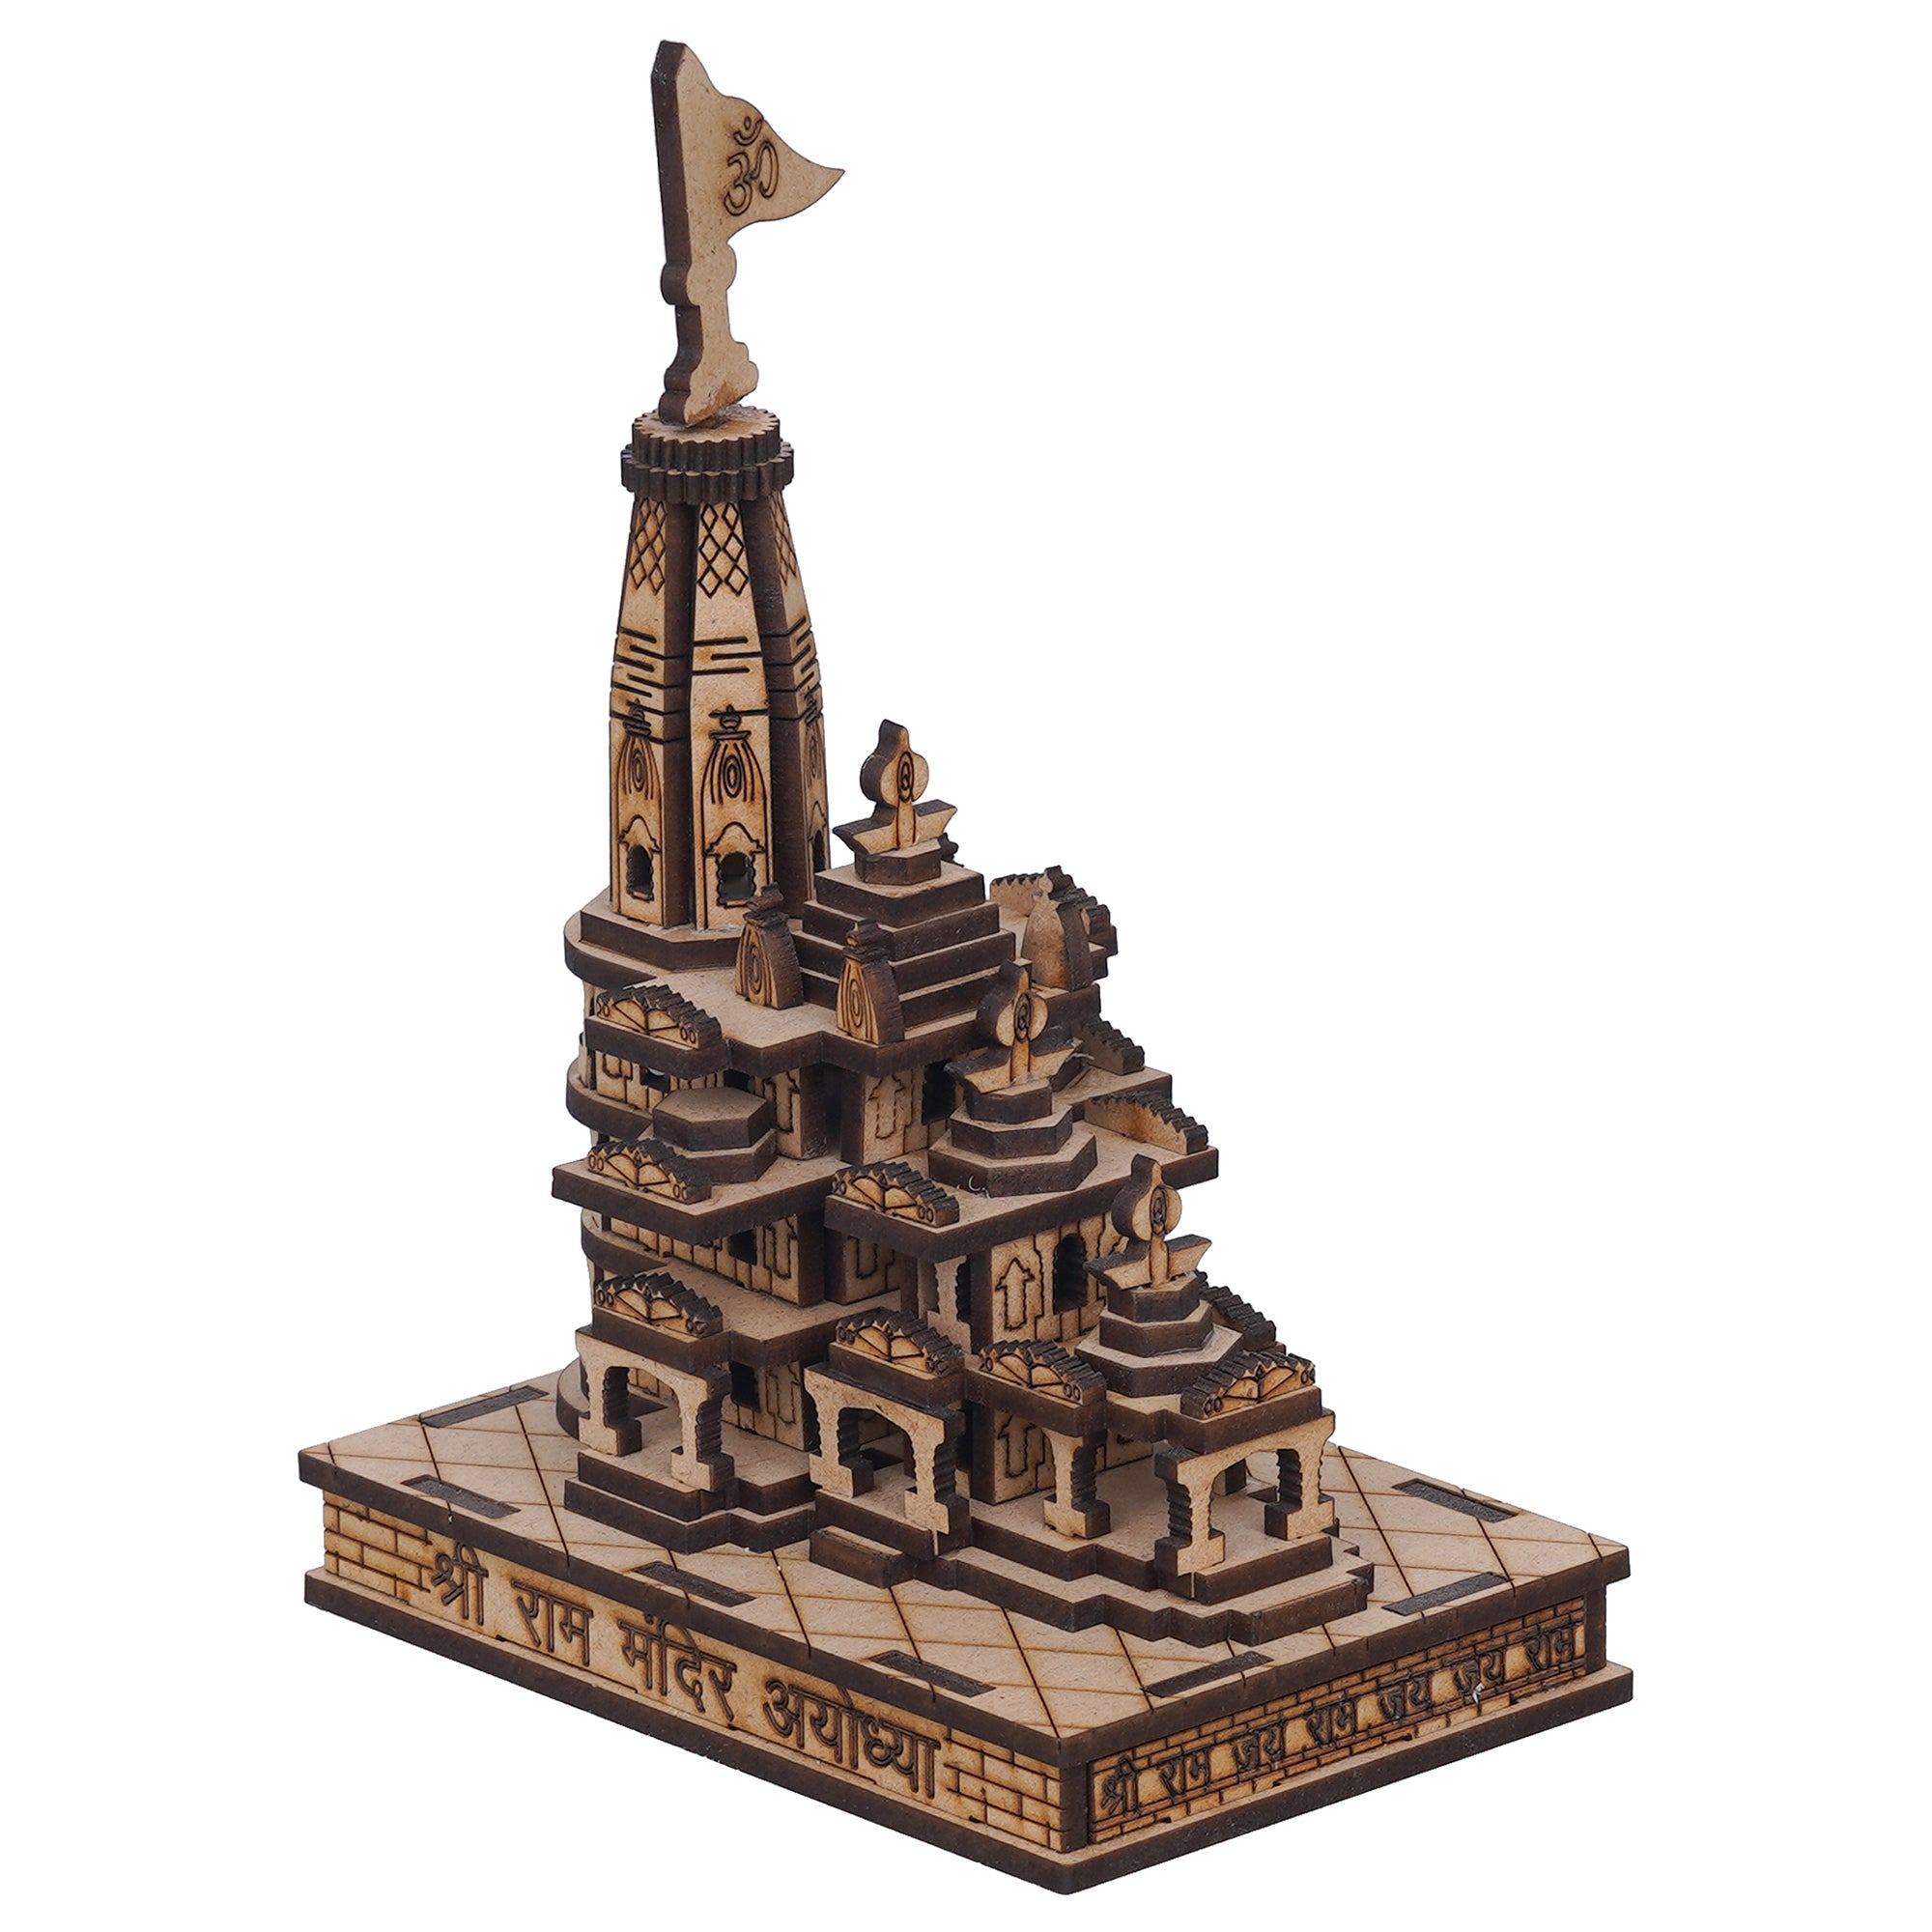 eCraftIndia Shri Ram Mandir Ayodhya Model - Wooden MDF Craftsmanship Authentic Designer Temple with Protective Gift Box - Ideal for Home Temple, Decor, and Spiritual Gifting 2